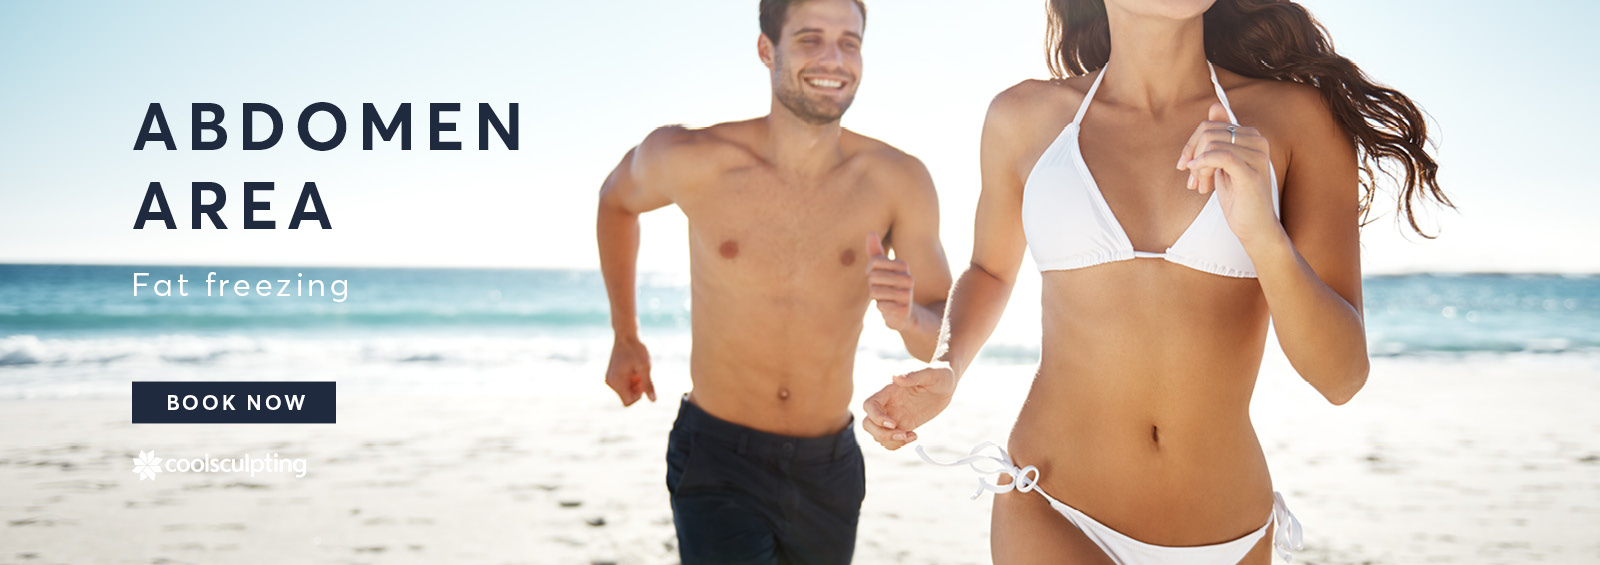 A banner image of male and female showing there abdomen area in there swimwear running on the beach for CoolSculpting treatment